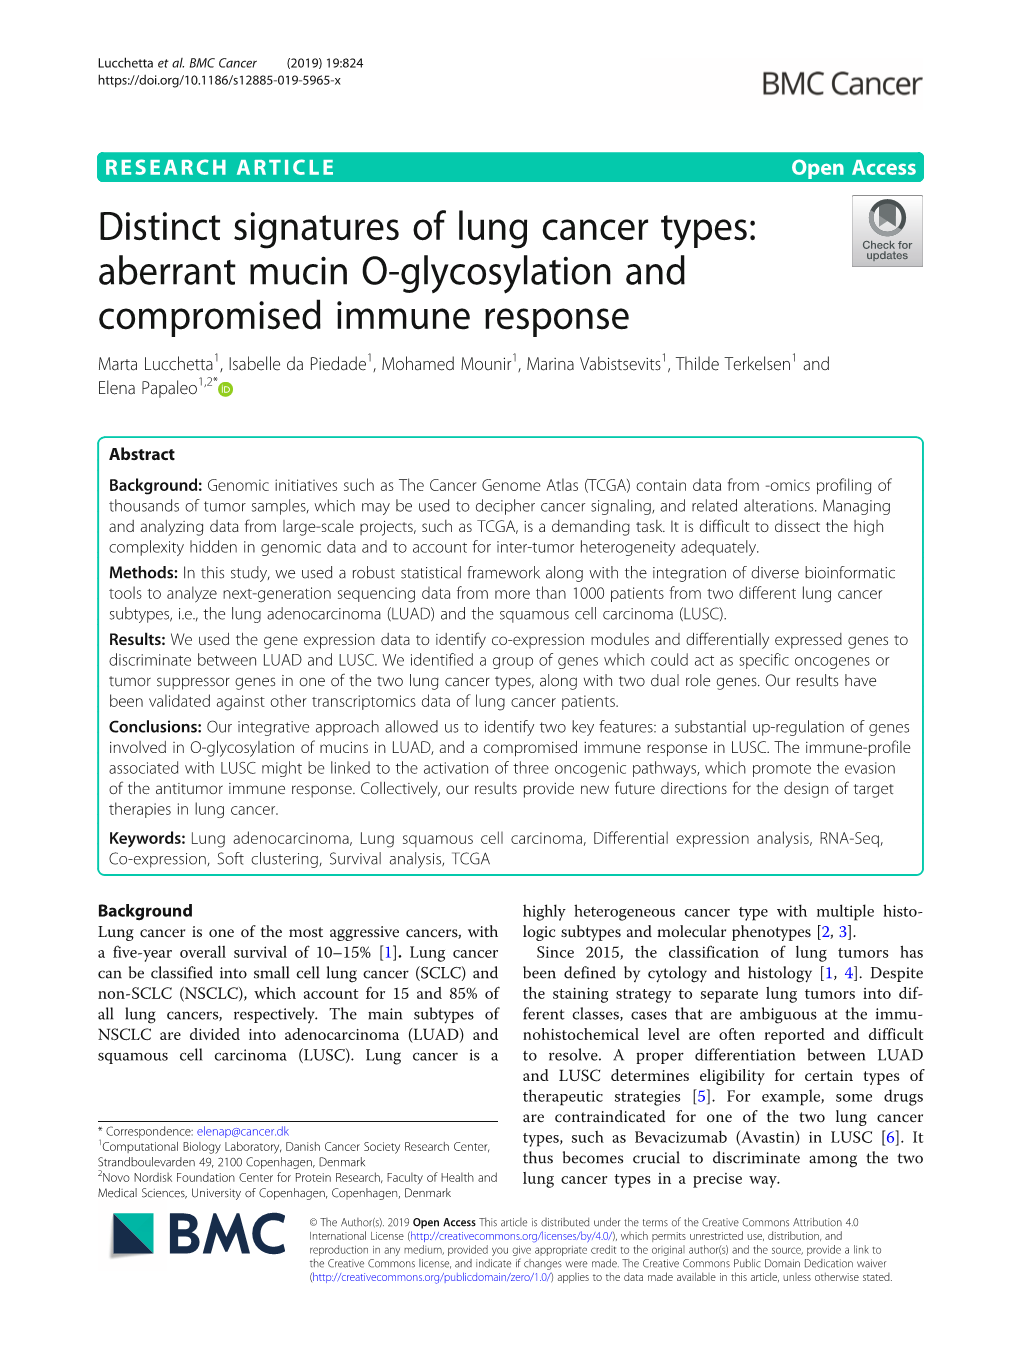 Distinct Signatures of Lung Cancer Types